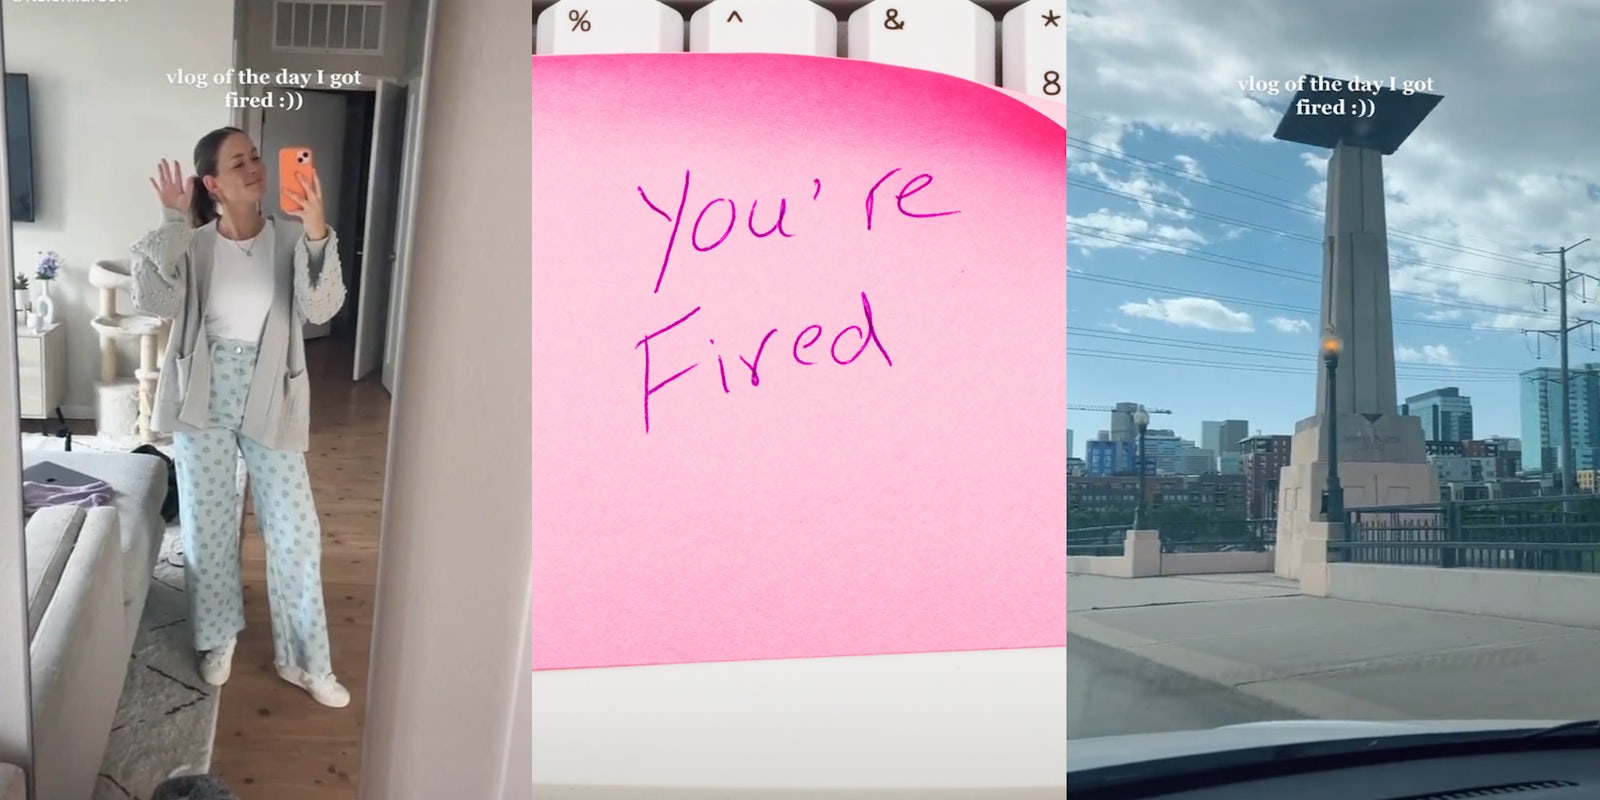 woman posing in outfit at mirror caption 'vlog of the day I got fired :))' (l) pink sticky note that says 'you're fired' on white keyboard (c) driving view of outside caption 'vlog of the day I got fired :))' (r)